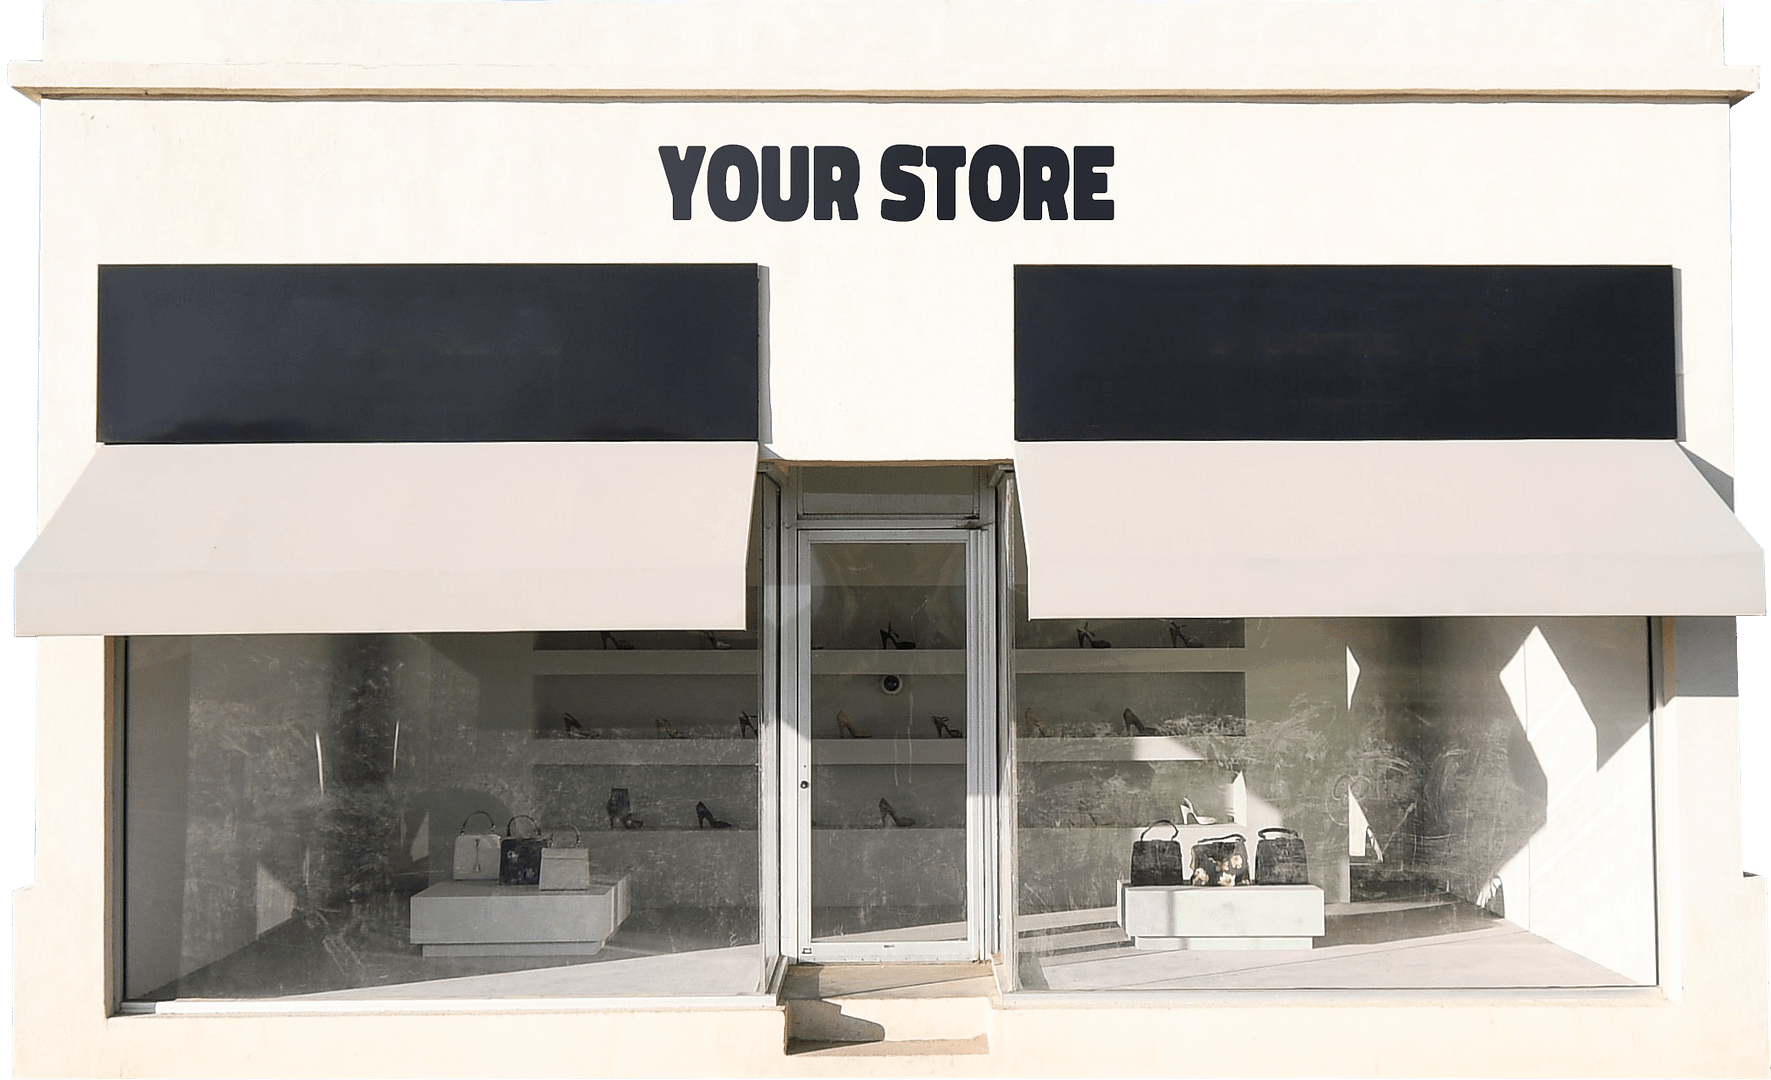 Small business storefront that says "your store"